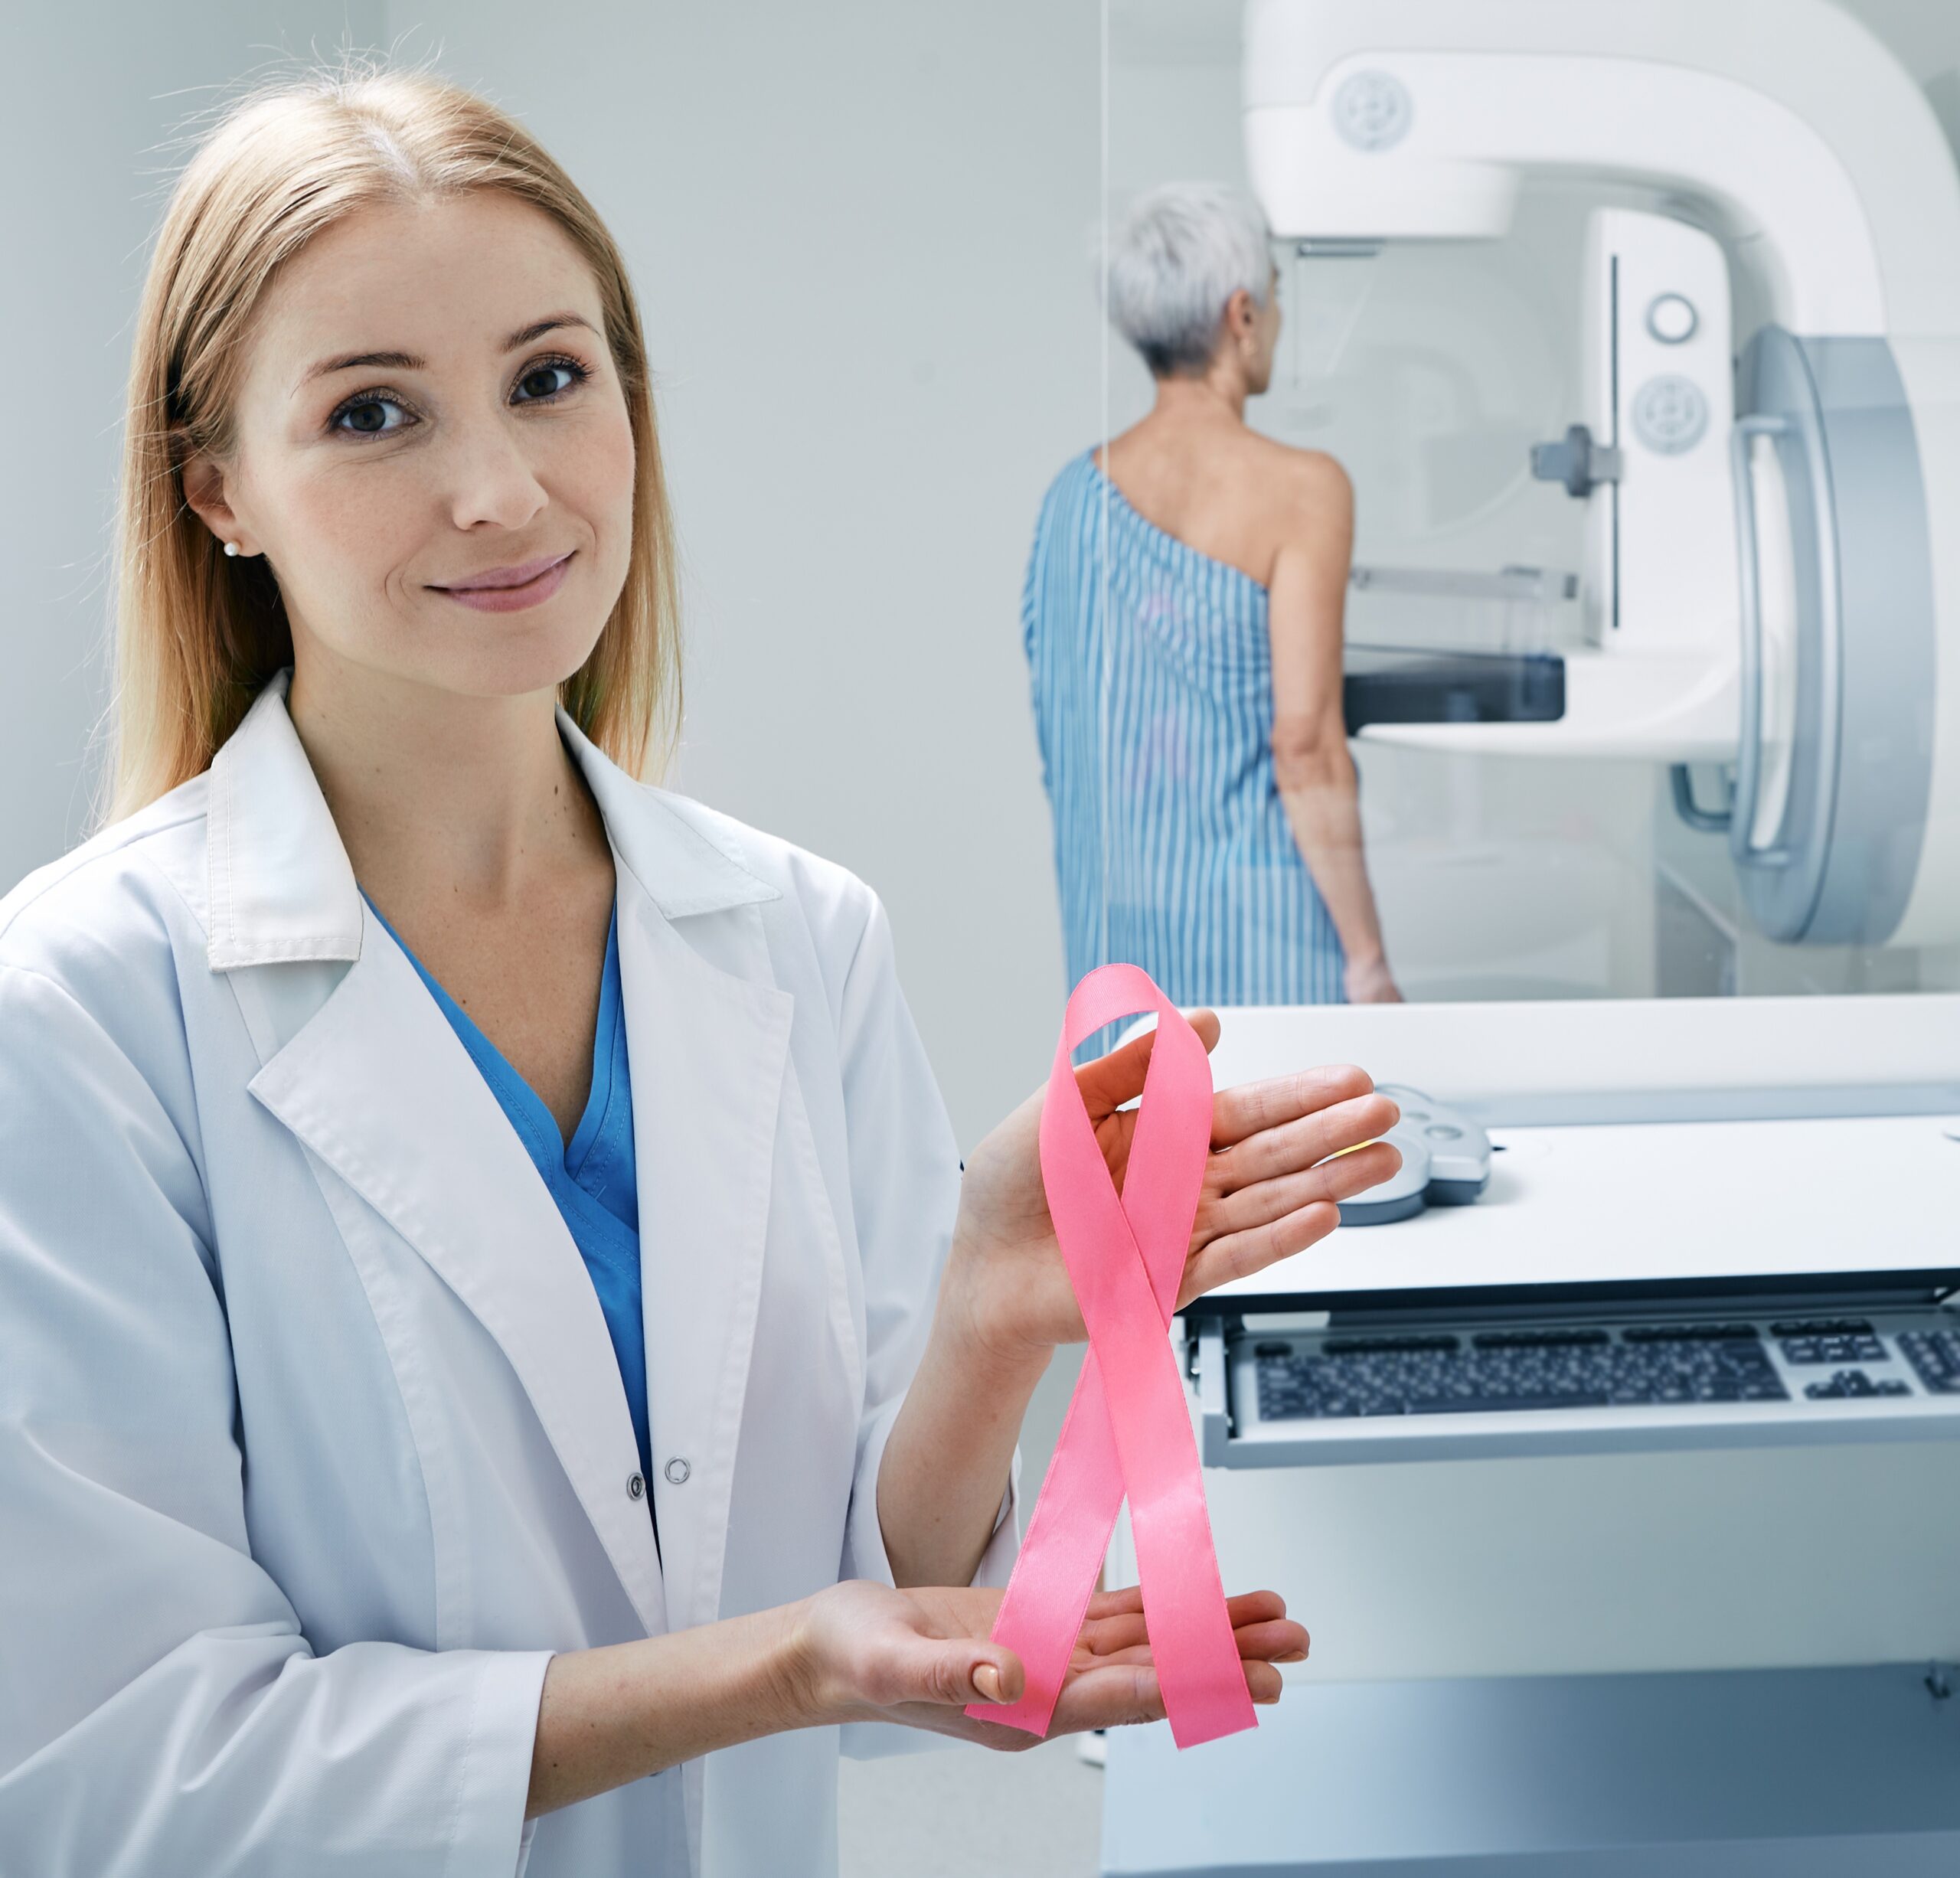 Breast cancer ribbon held by medical professional with mammogram machine in background.